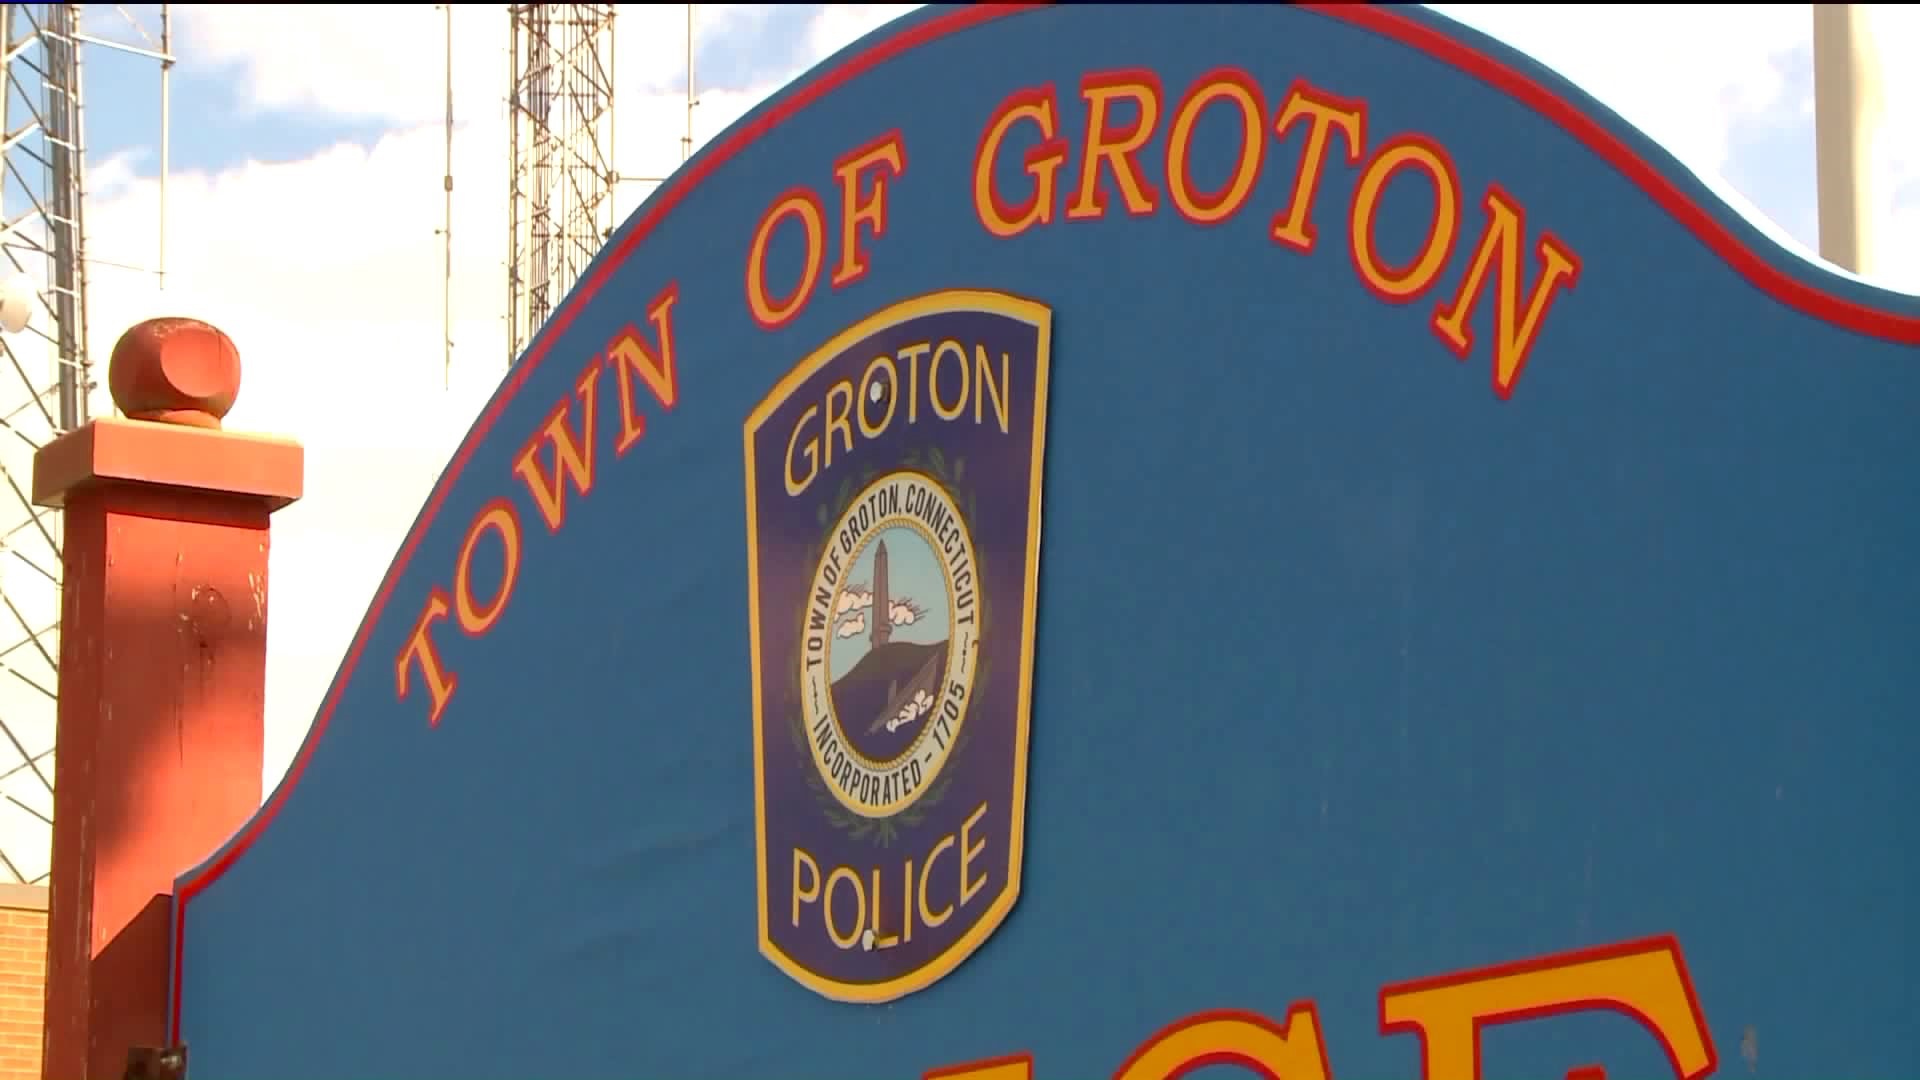 All Groton school employees subjected to data breach